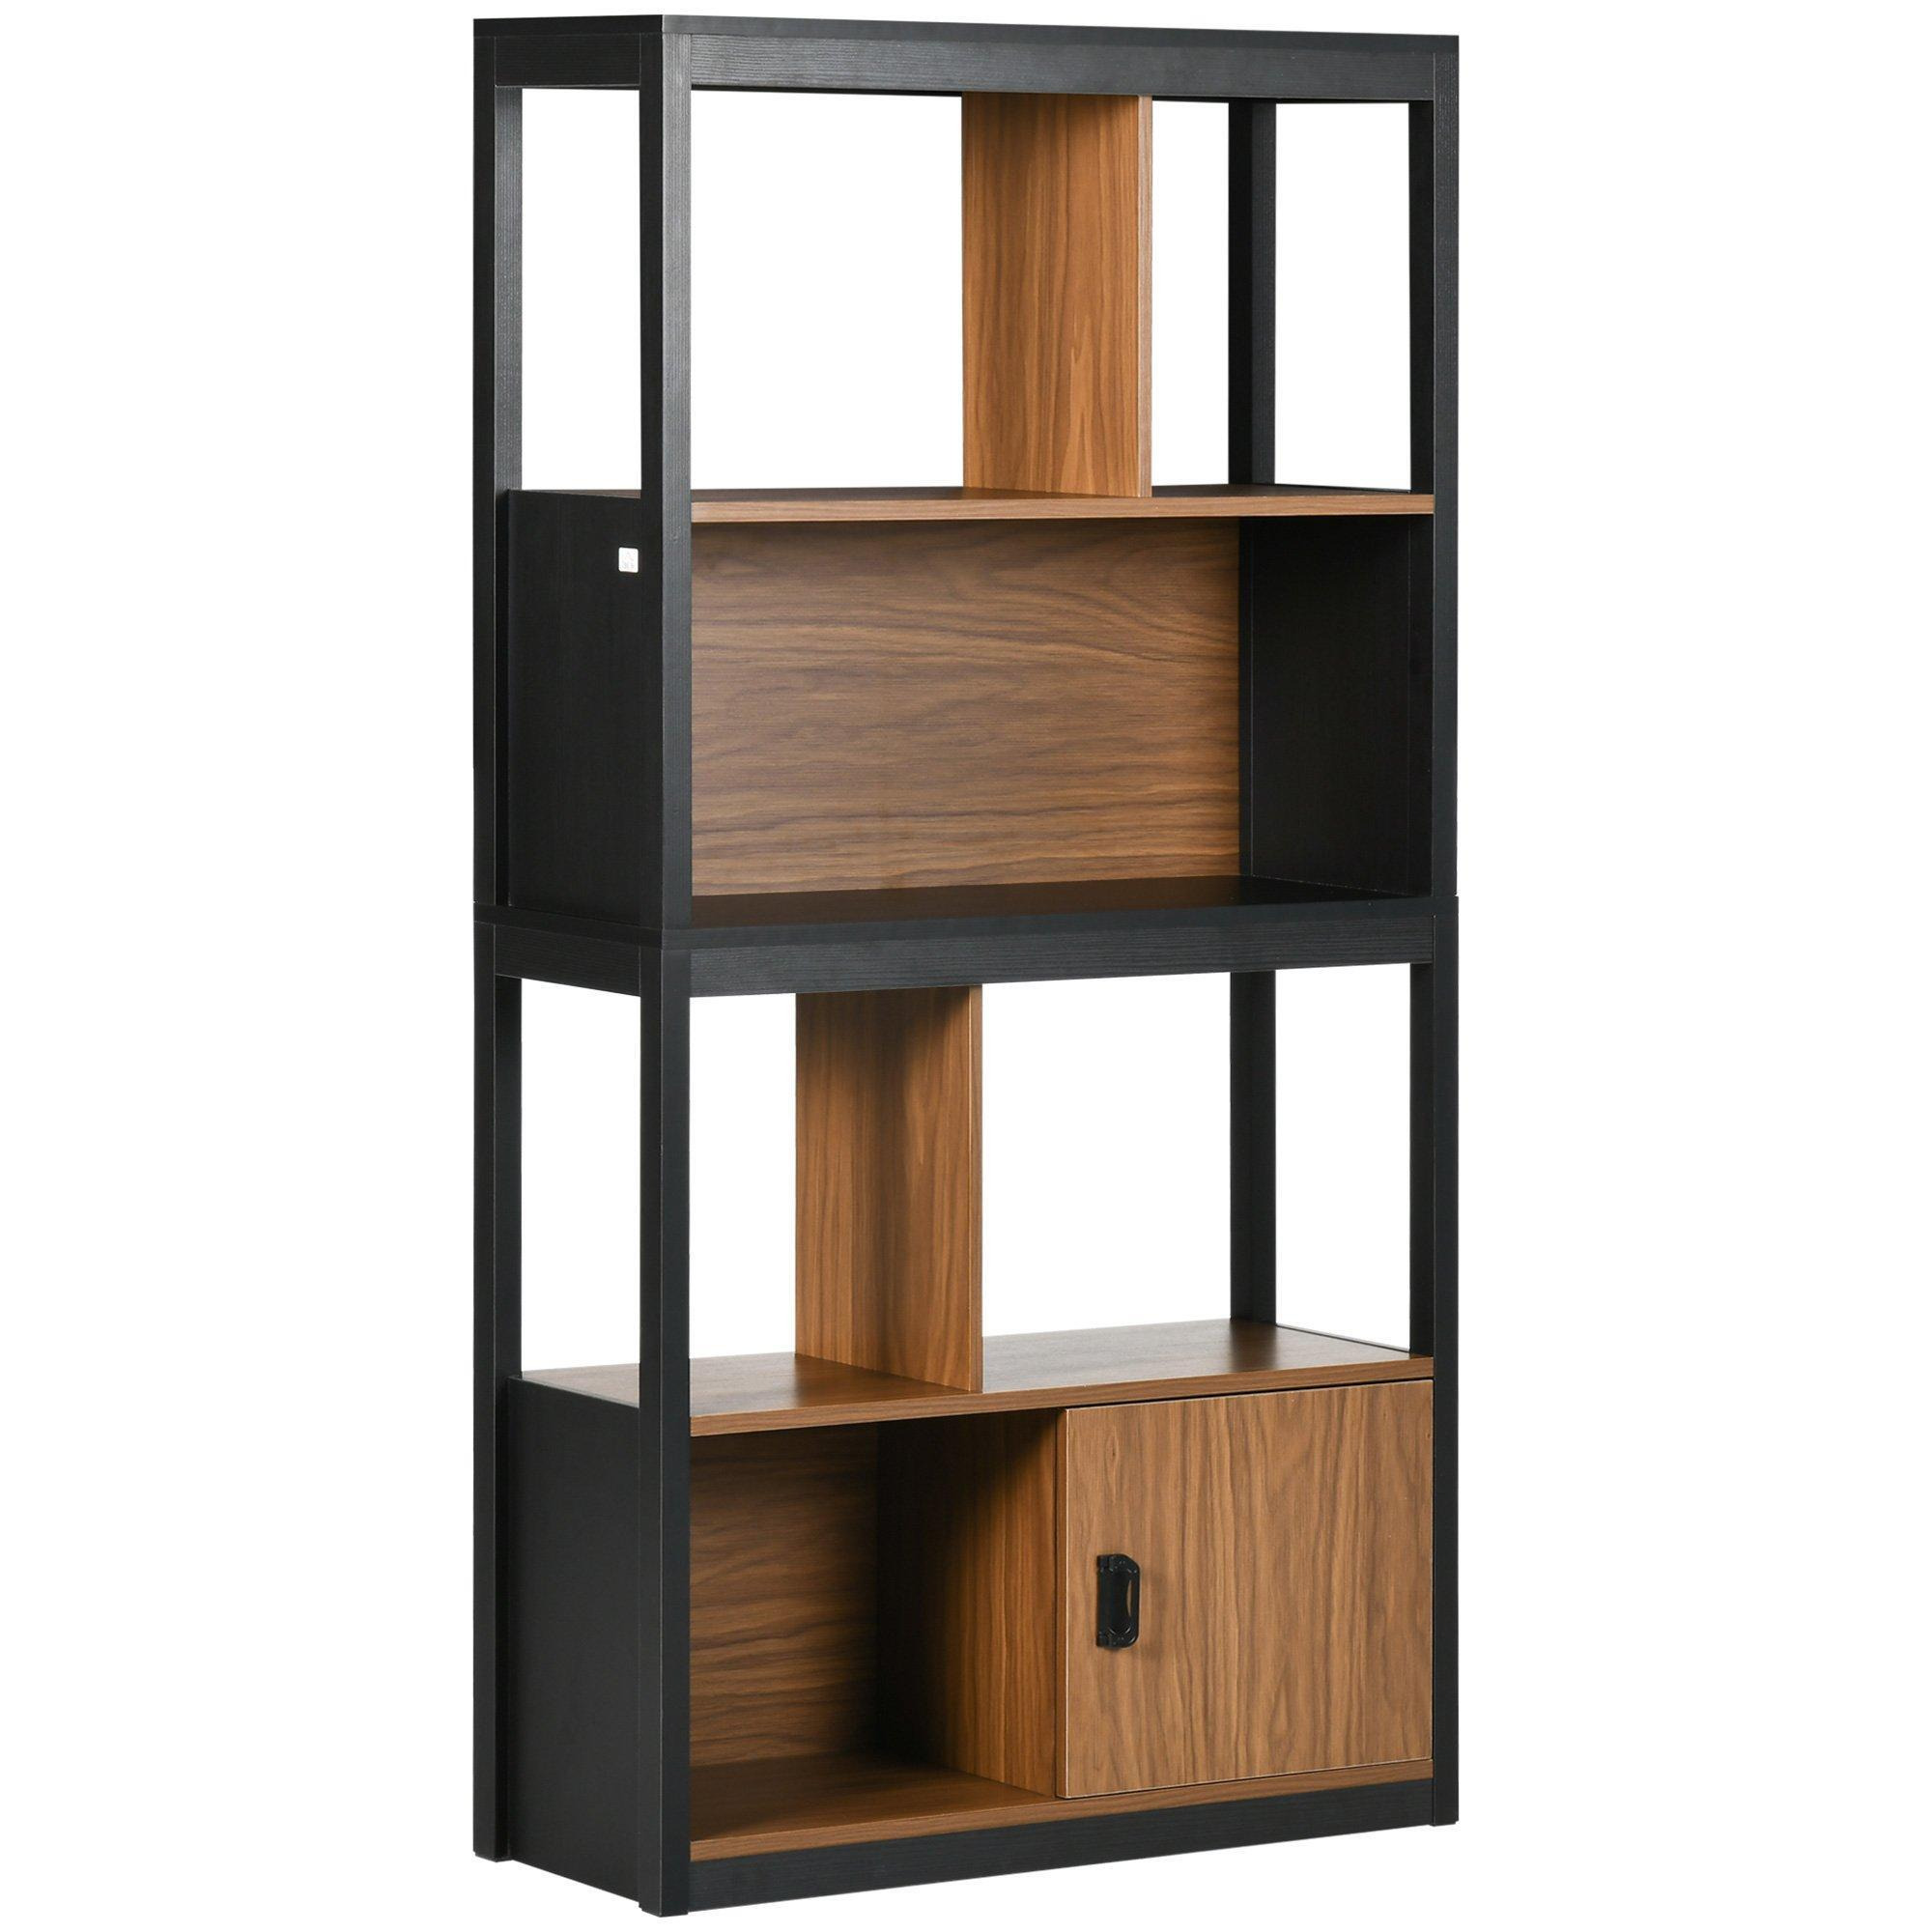 4-Tier Bookshelf Bookcase with Storage Shelves Cabinet Home Office - image 1